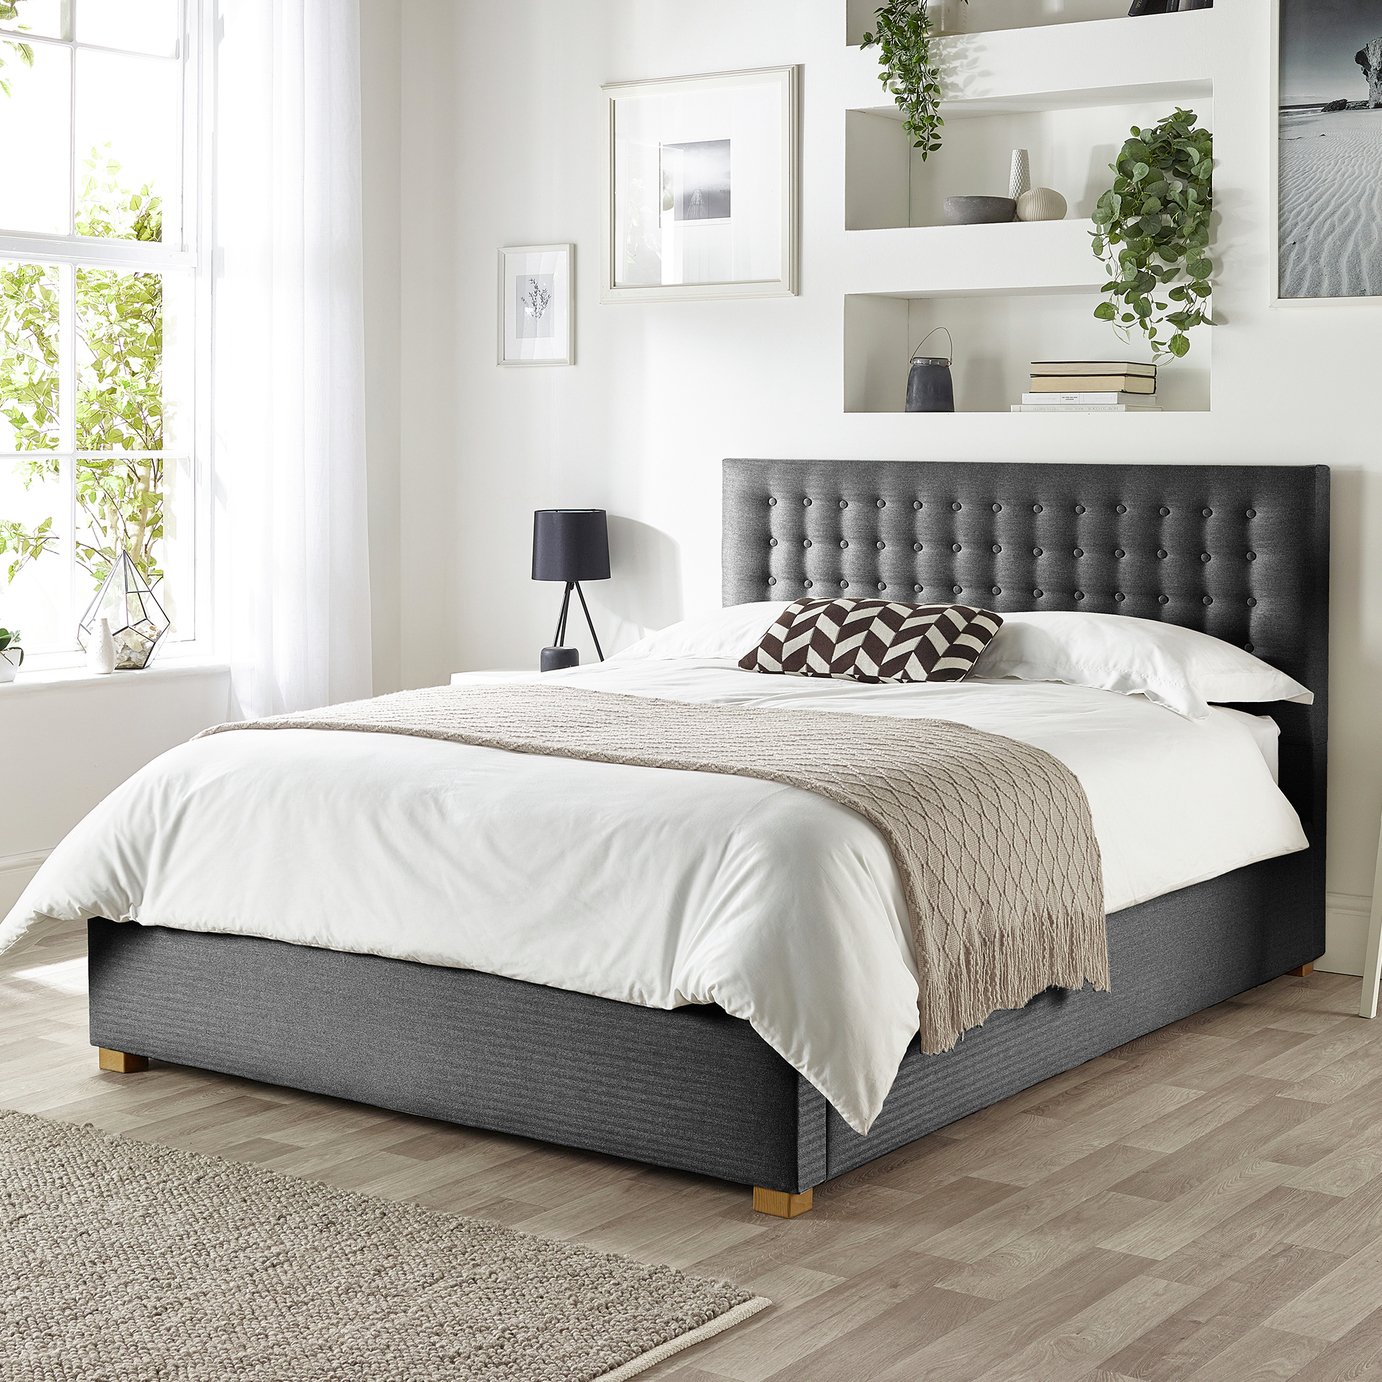 CL Opulence Twill Double Ottoman Bedframe Charcoal